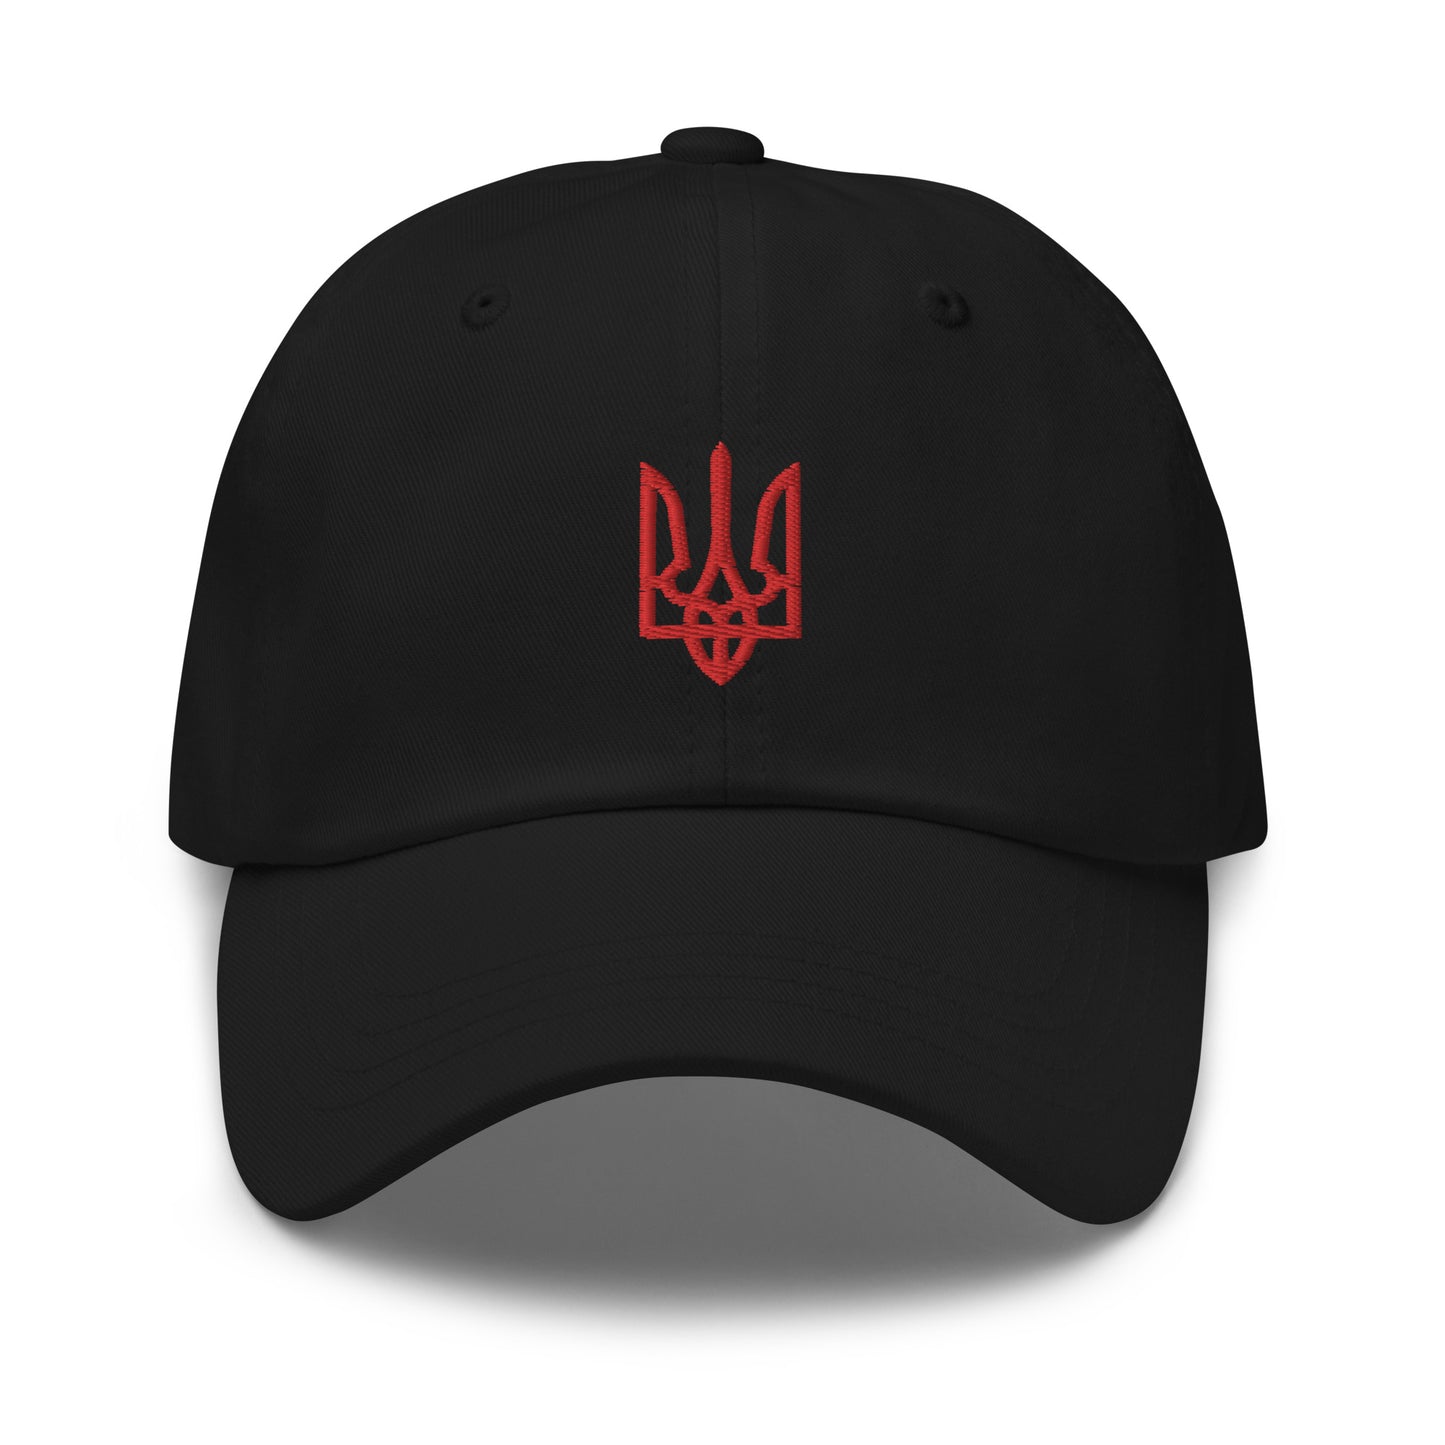 Black hat with red tryzub